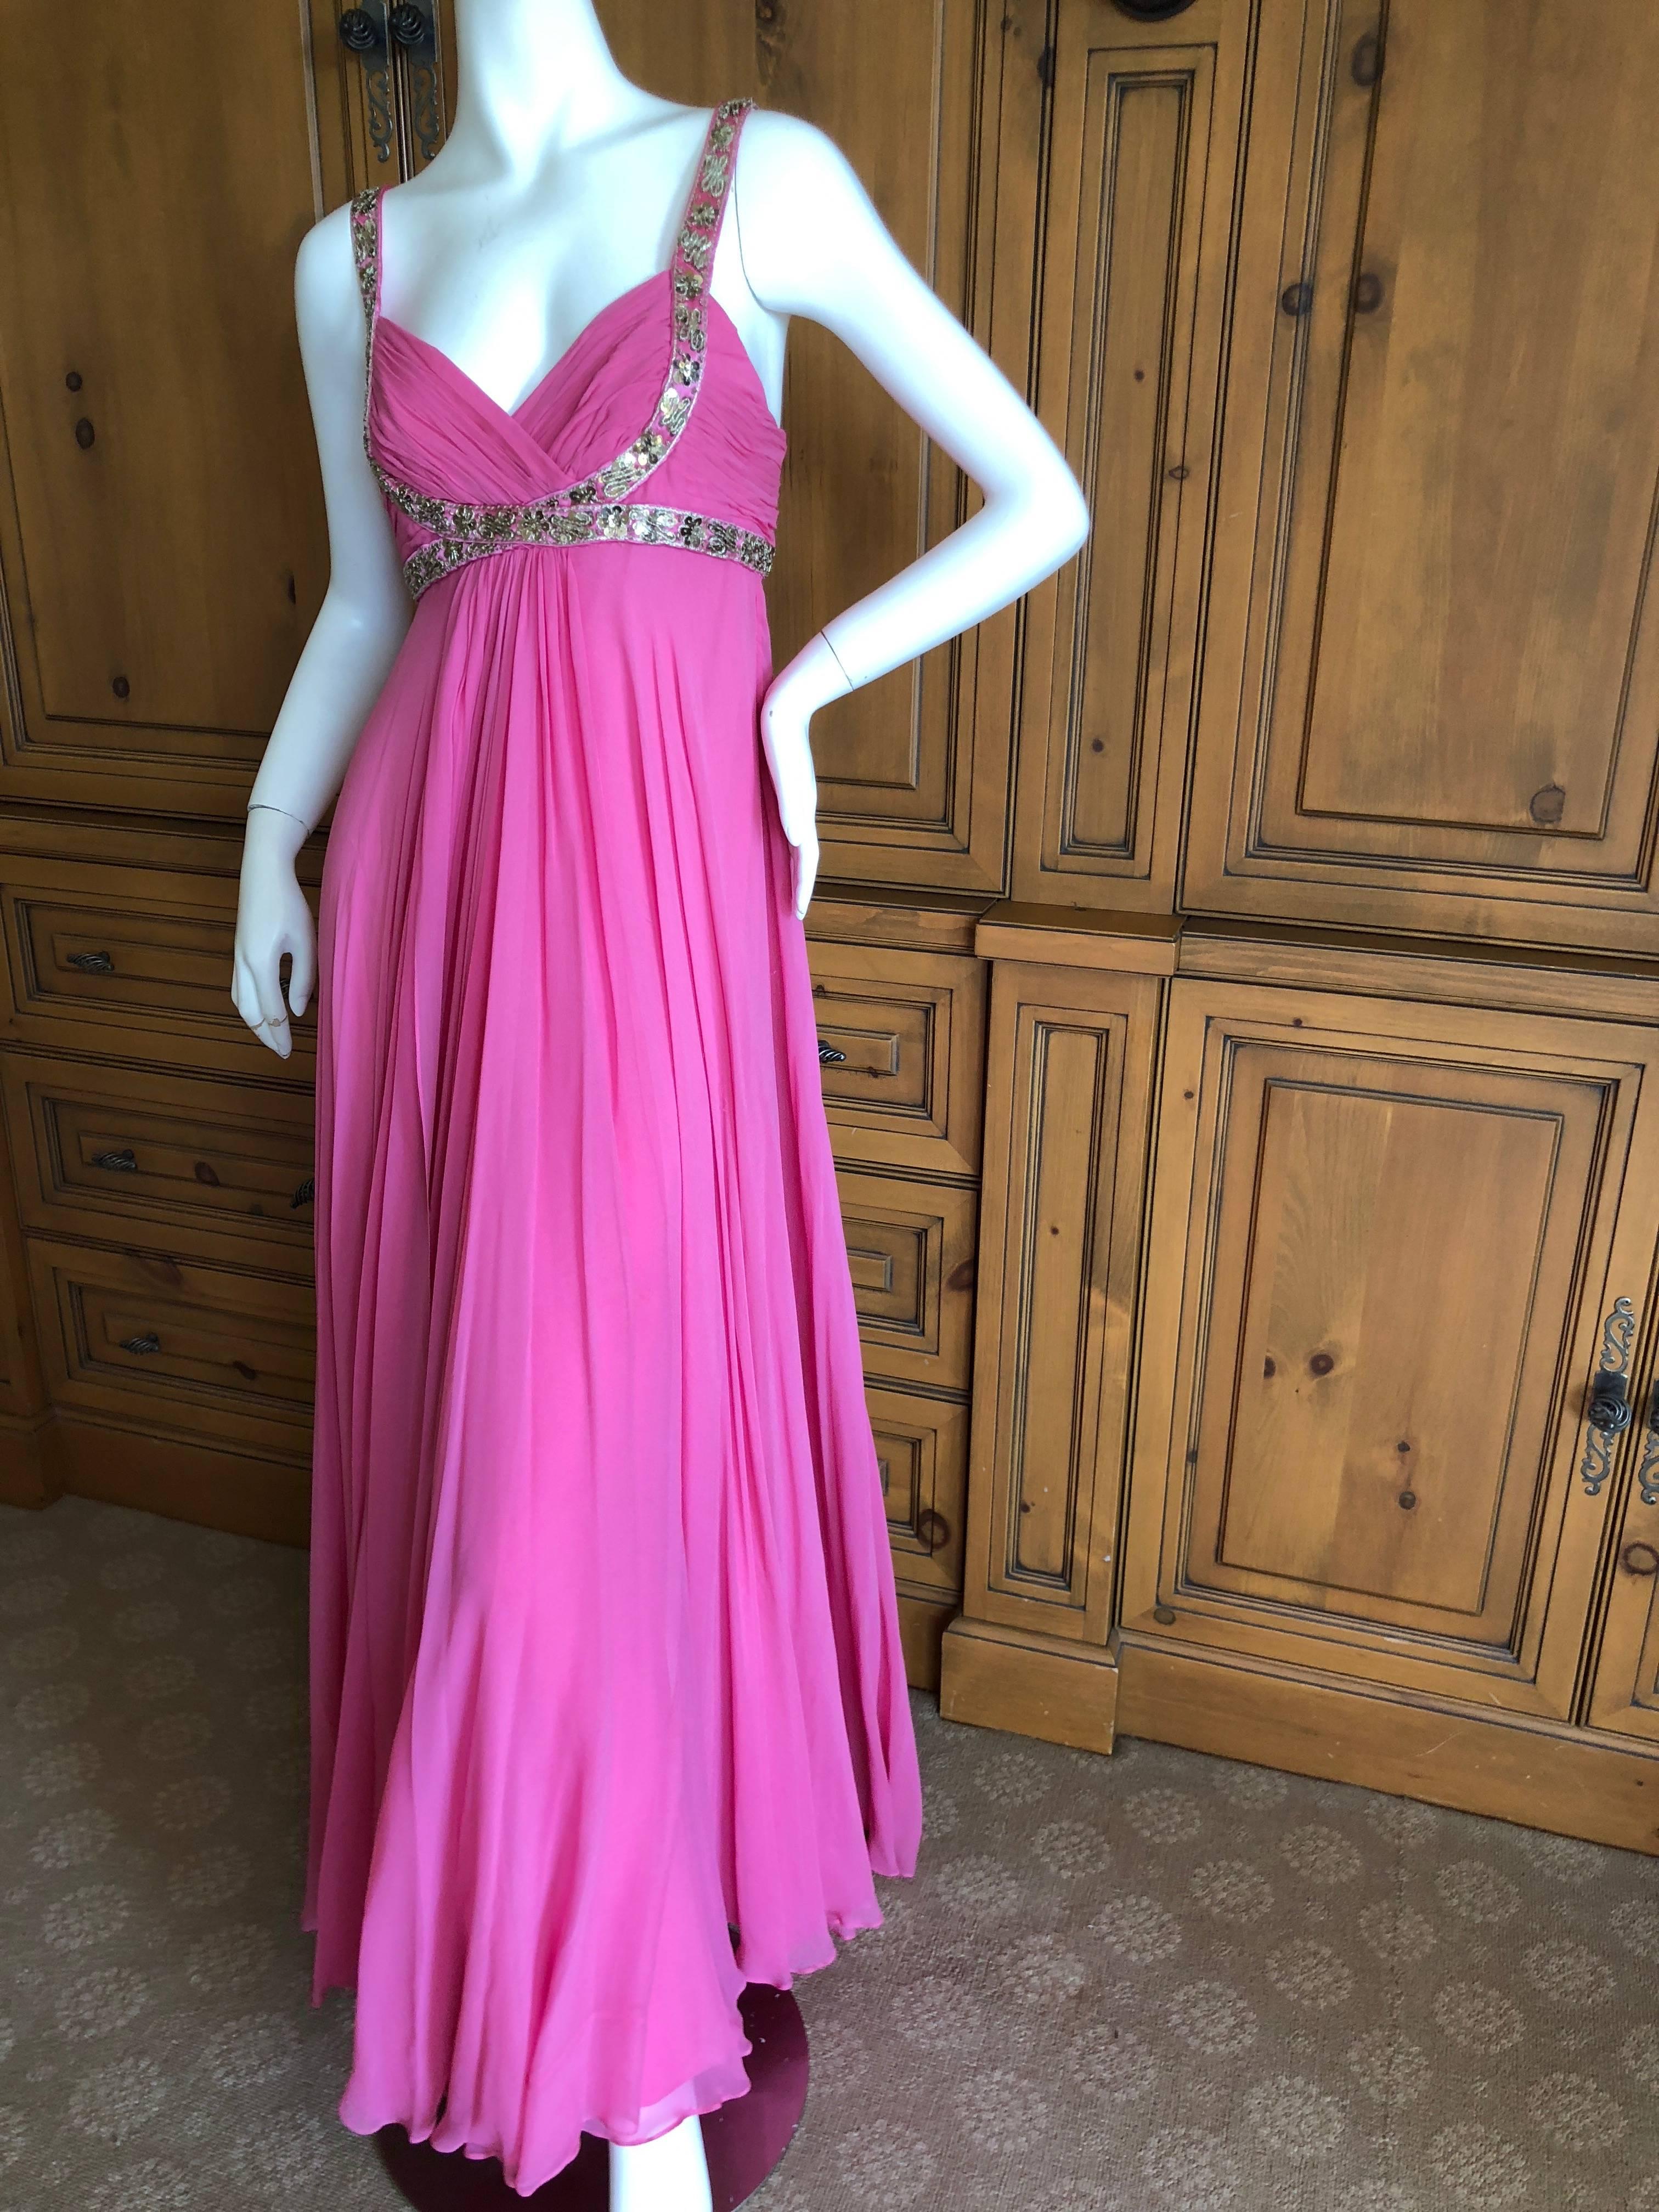 Marchesa Notte Silver Sequin Accented Pink Grecian Gown.
This is so pretty, from Marchesa Notte's first collection.
Size 8
Bust  36